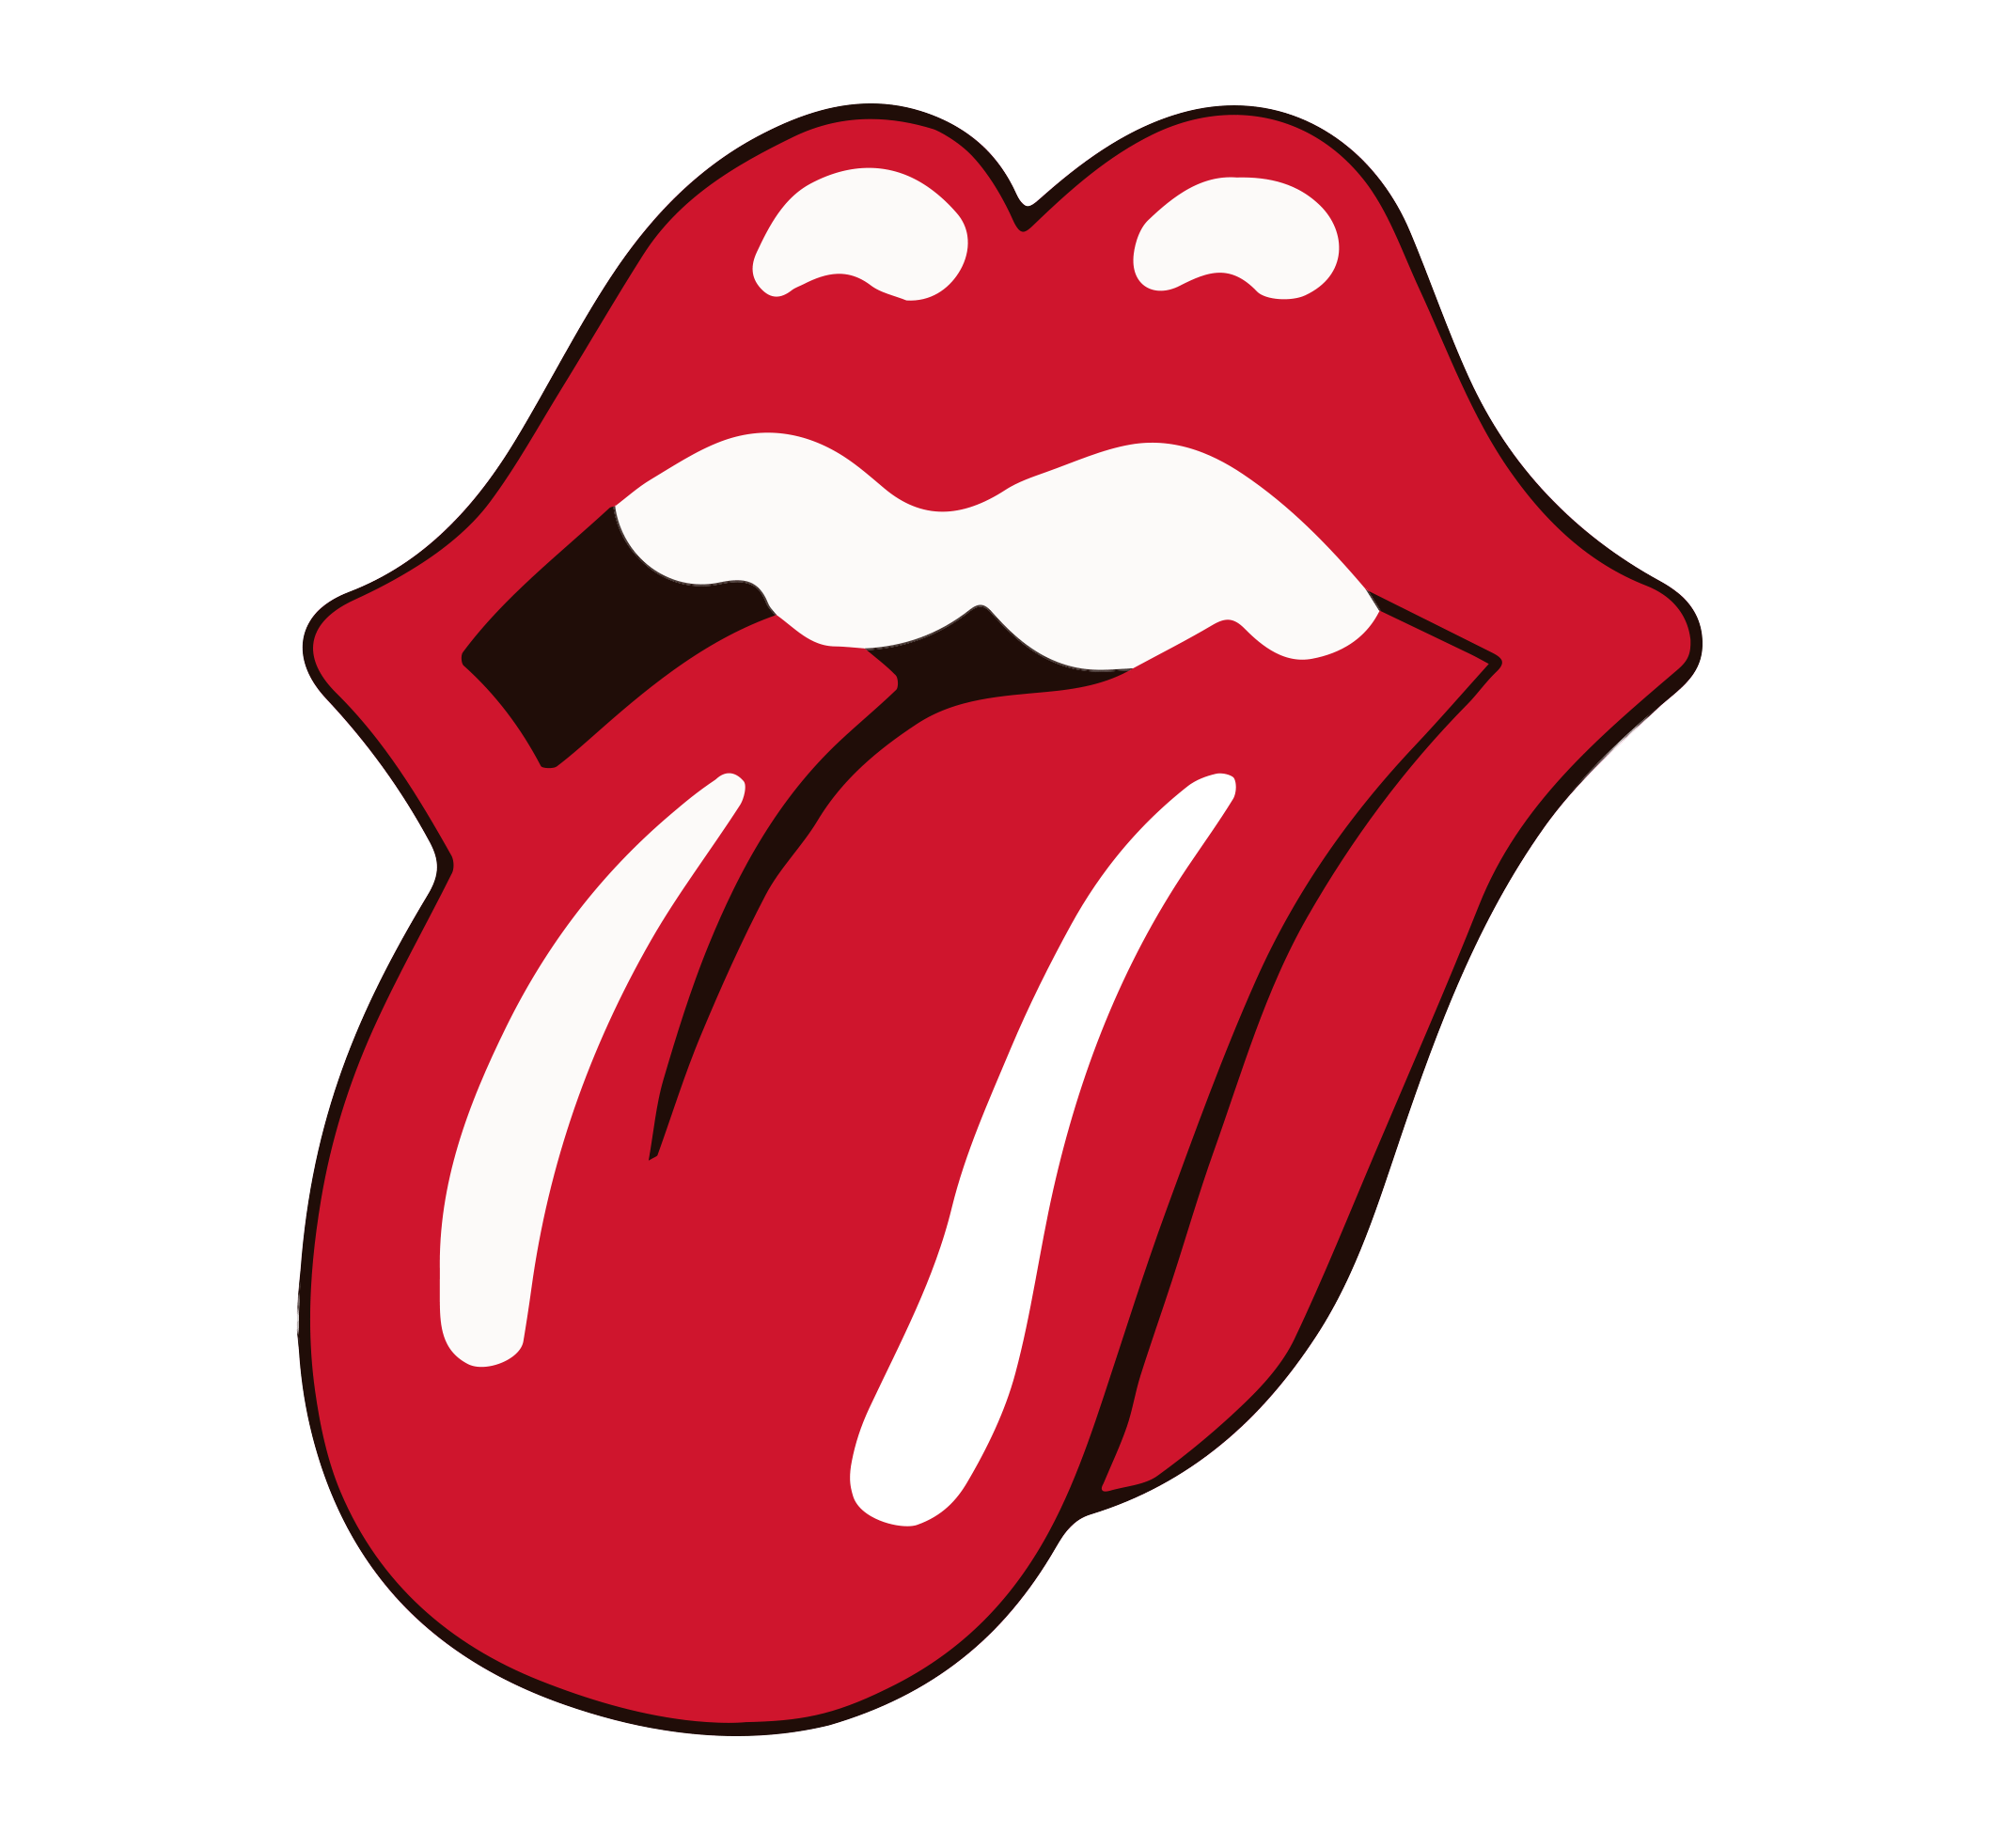 CoolWalls.ca sticker 15" x 17" Rolling Stones Iconic Decal, Peel-N-Stick, Wall Decal, Zero Wall Damage Removal